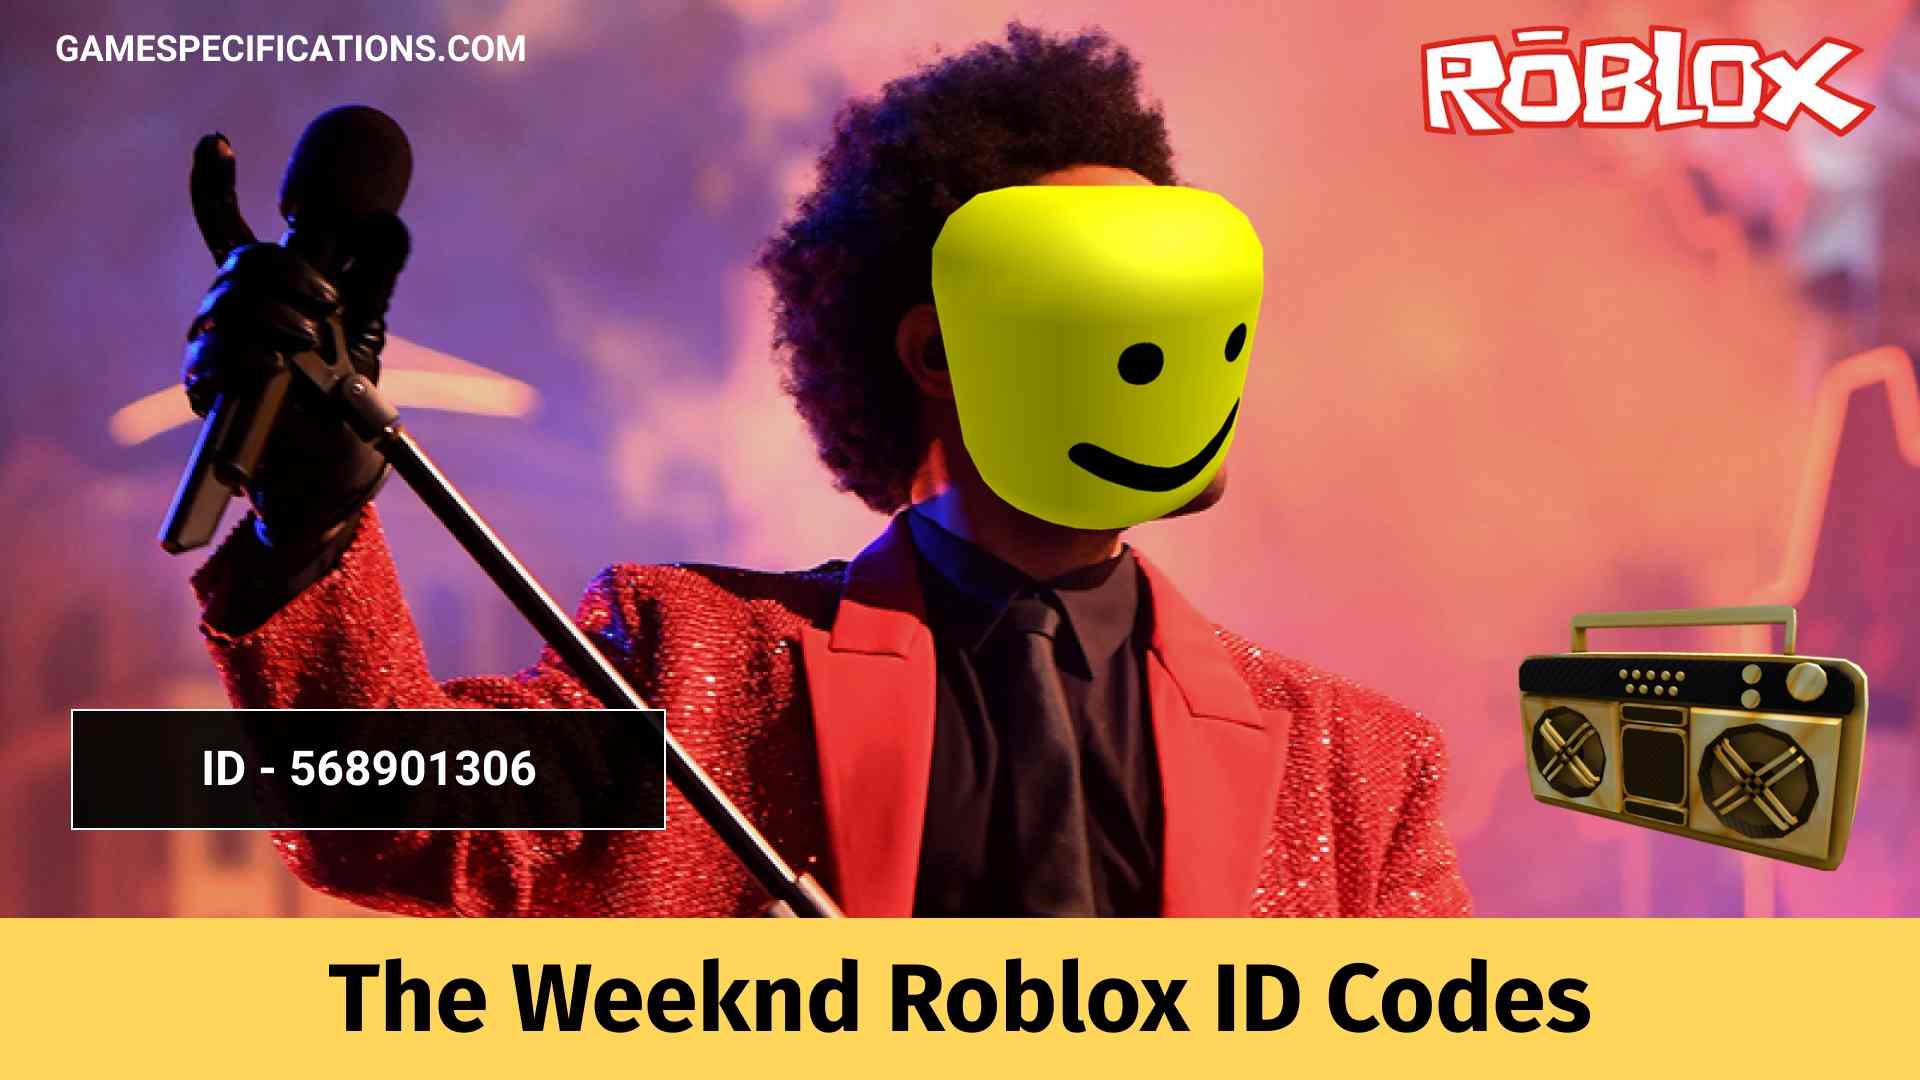 The Weeknd Roblox ID Codes [2023] - Game Specifications